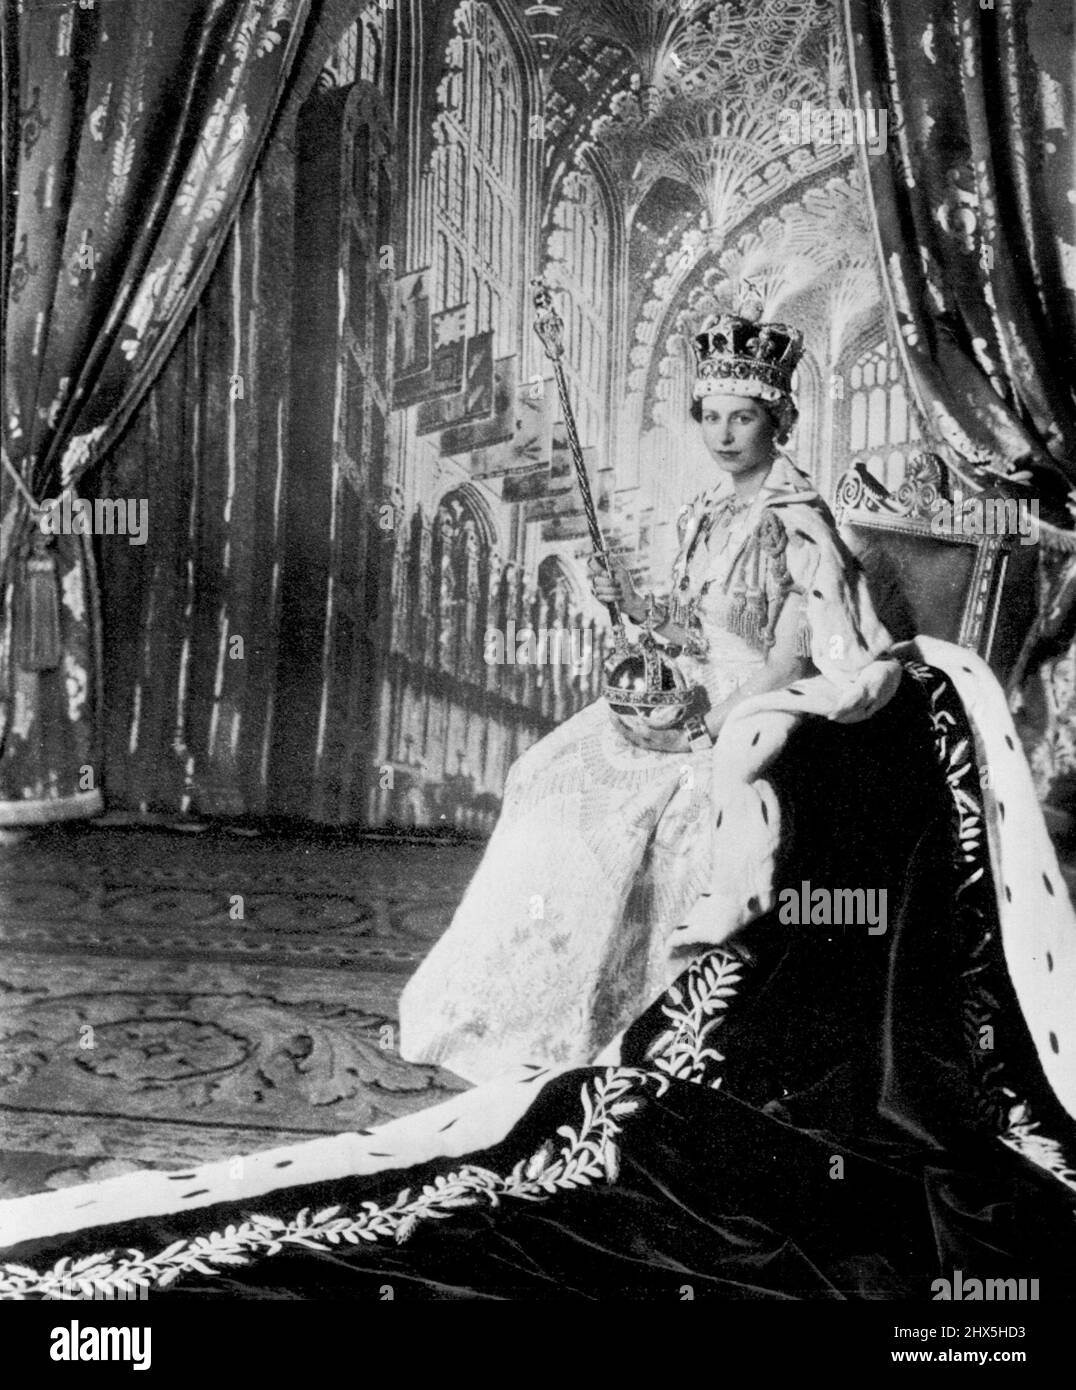 Regal Bearing -- Queen Elizabeth II, attired in her coronation dress and purple velvet robe, poses in Throne Room of Buckingham Palace after her coronation June 2. On her head is the Imperial Crown which she will wear on state occasions. In her left hand she hold the Orb, emblem of sovereign power and in her right hand the Scepter with Cross, ensign of kingly power and justice. On her wrists she wears the armills, or bracelets of sincerity. The backdrop for this photo by Cecil Beaton represents Henry VII Chapel in Westminster Abbey. June 09, 1953. (Photo by AP Wirephoto). Stock Photo